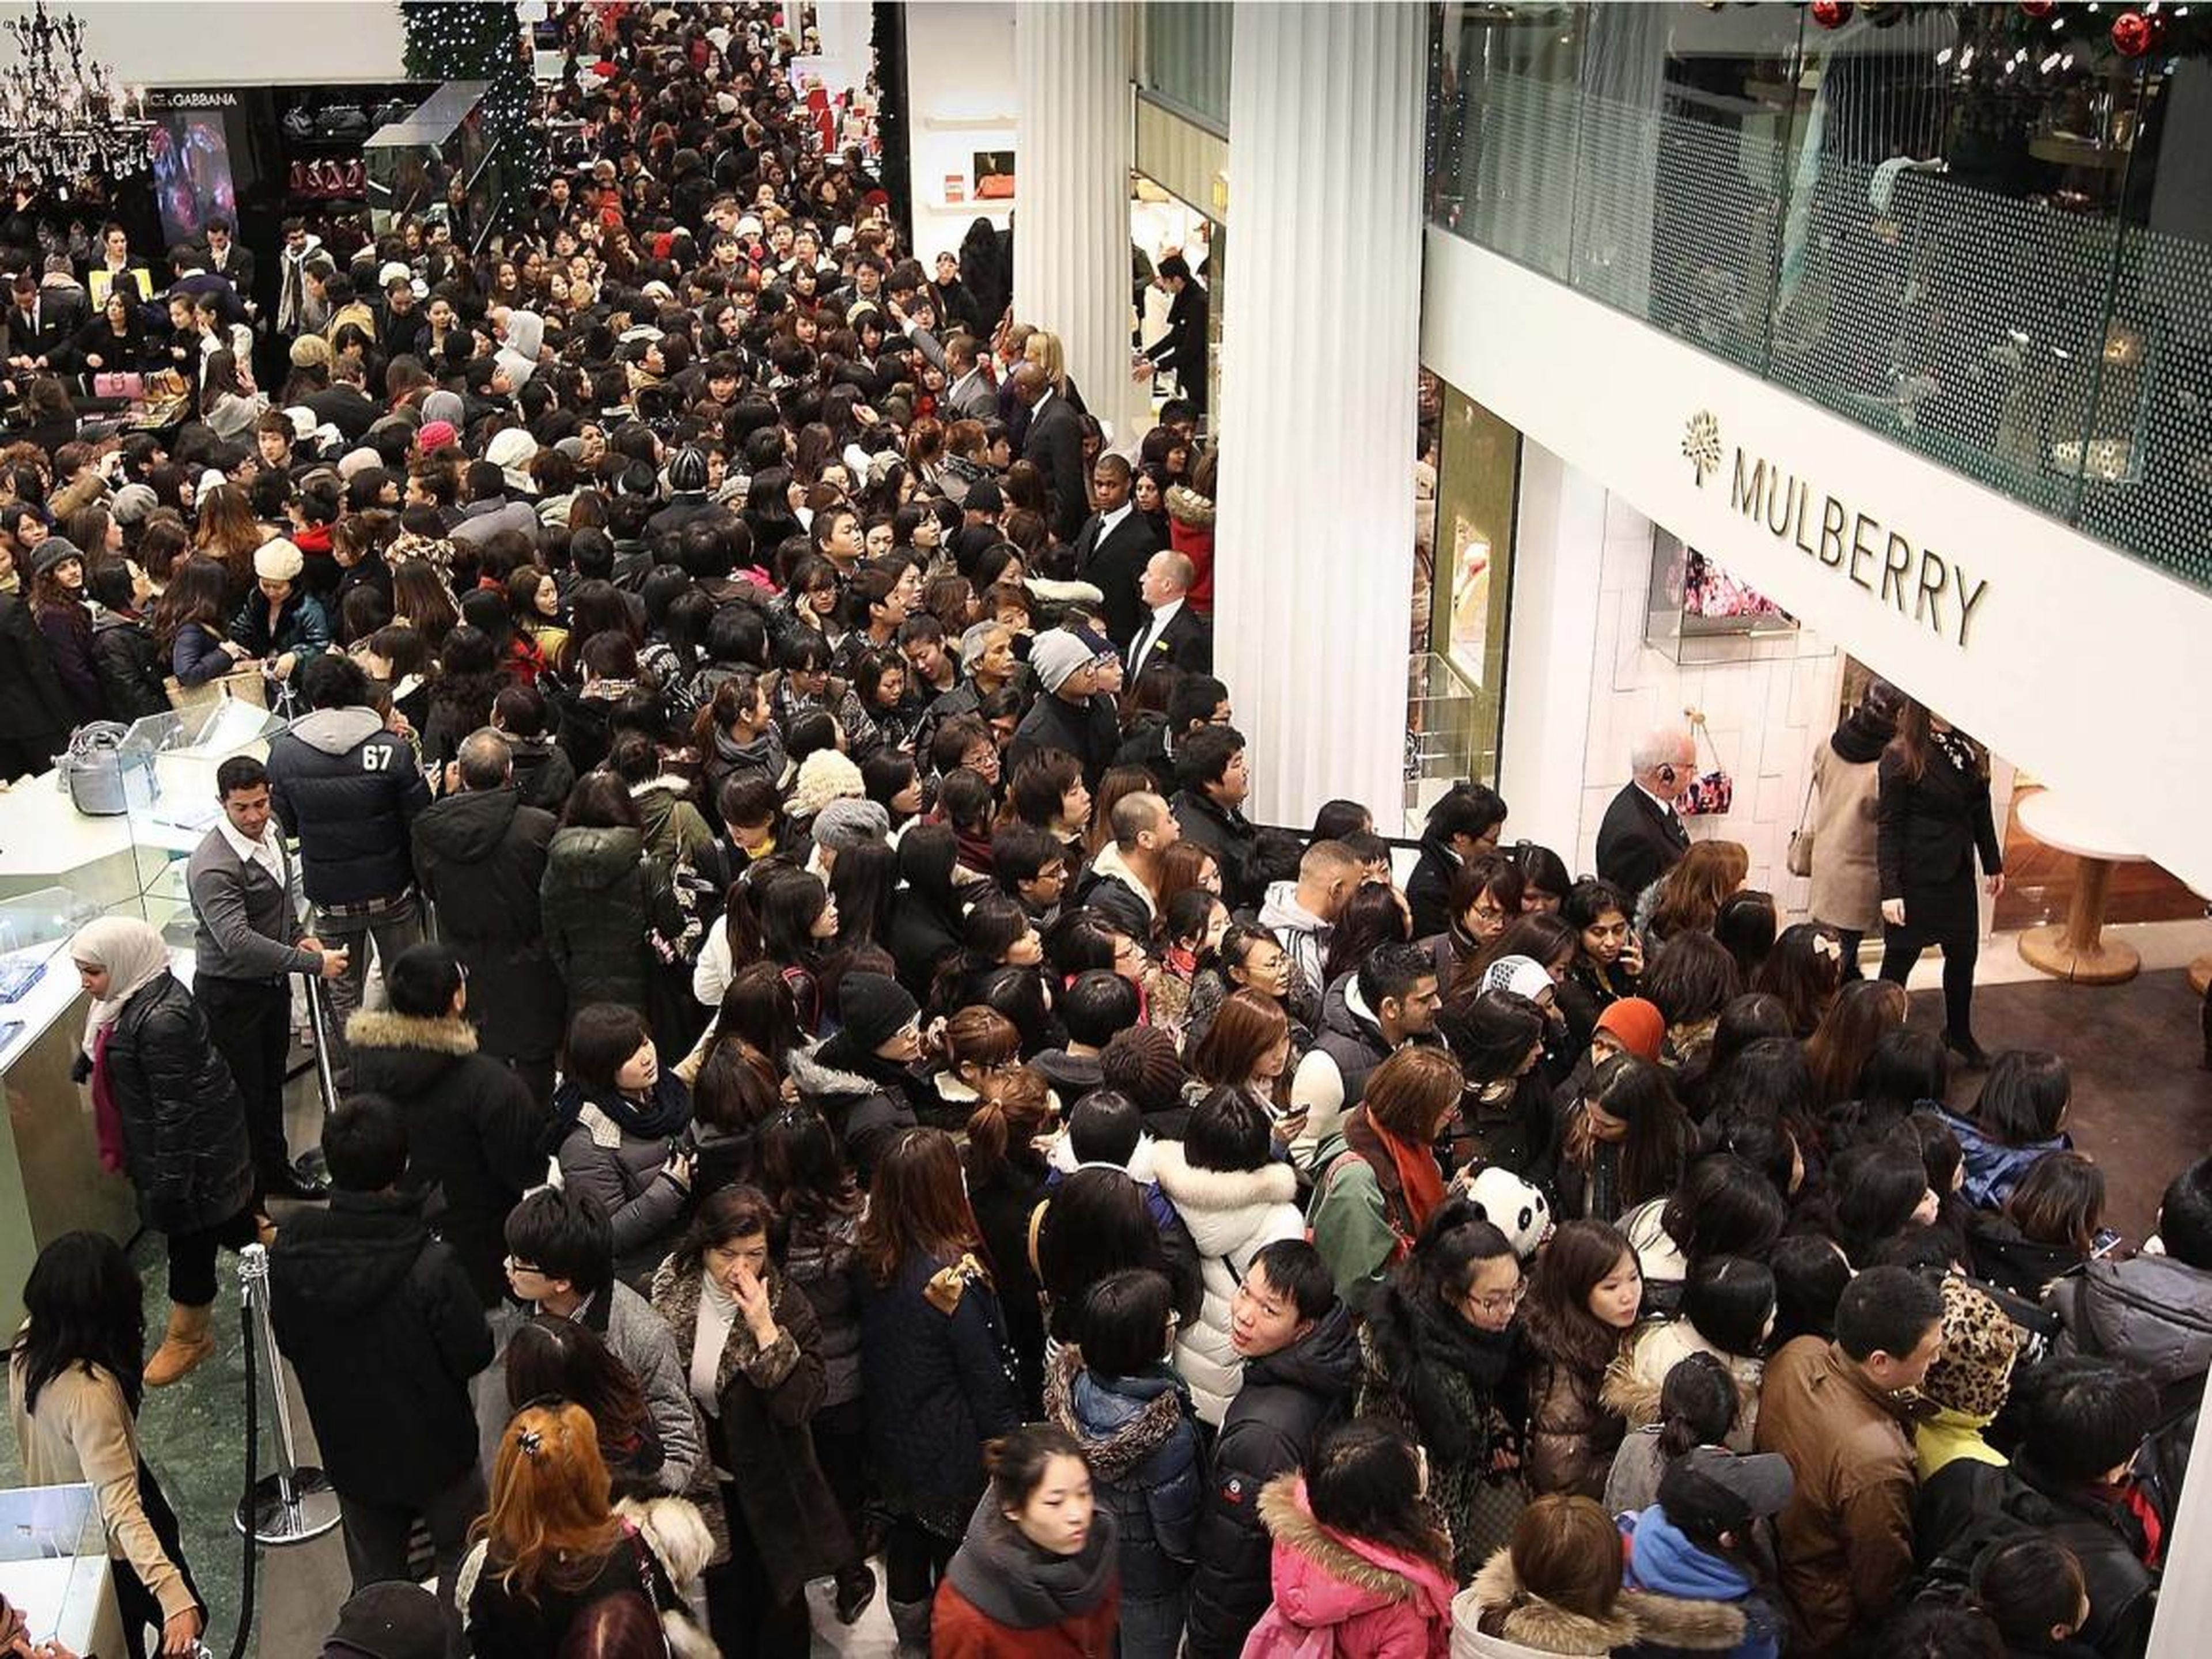 ... though cramming yourself into throngs of mall-goers still seems like a lot of work.